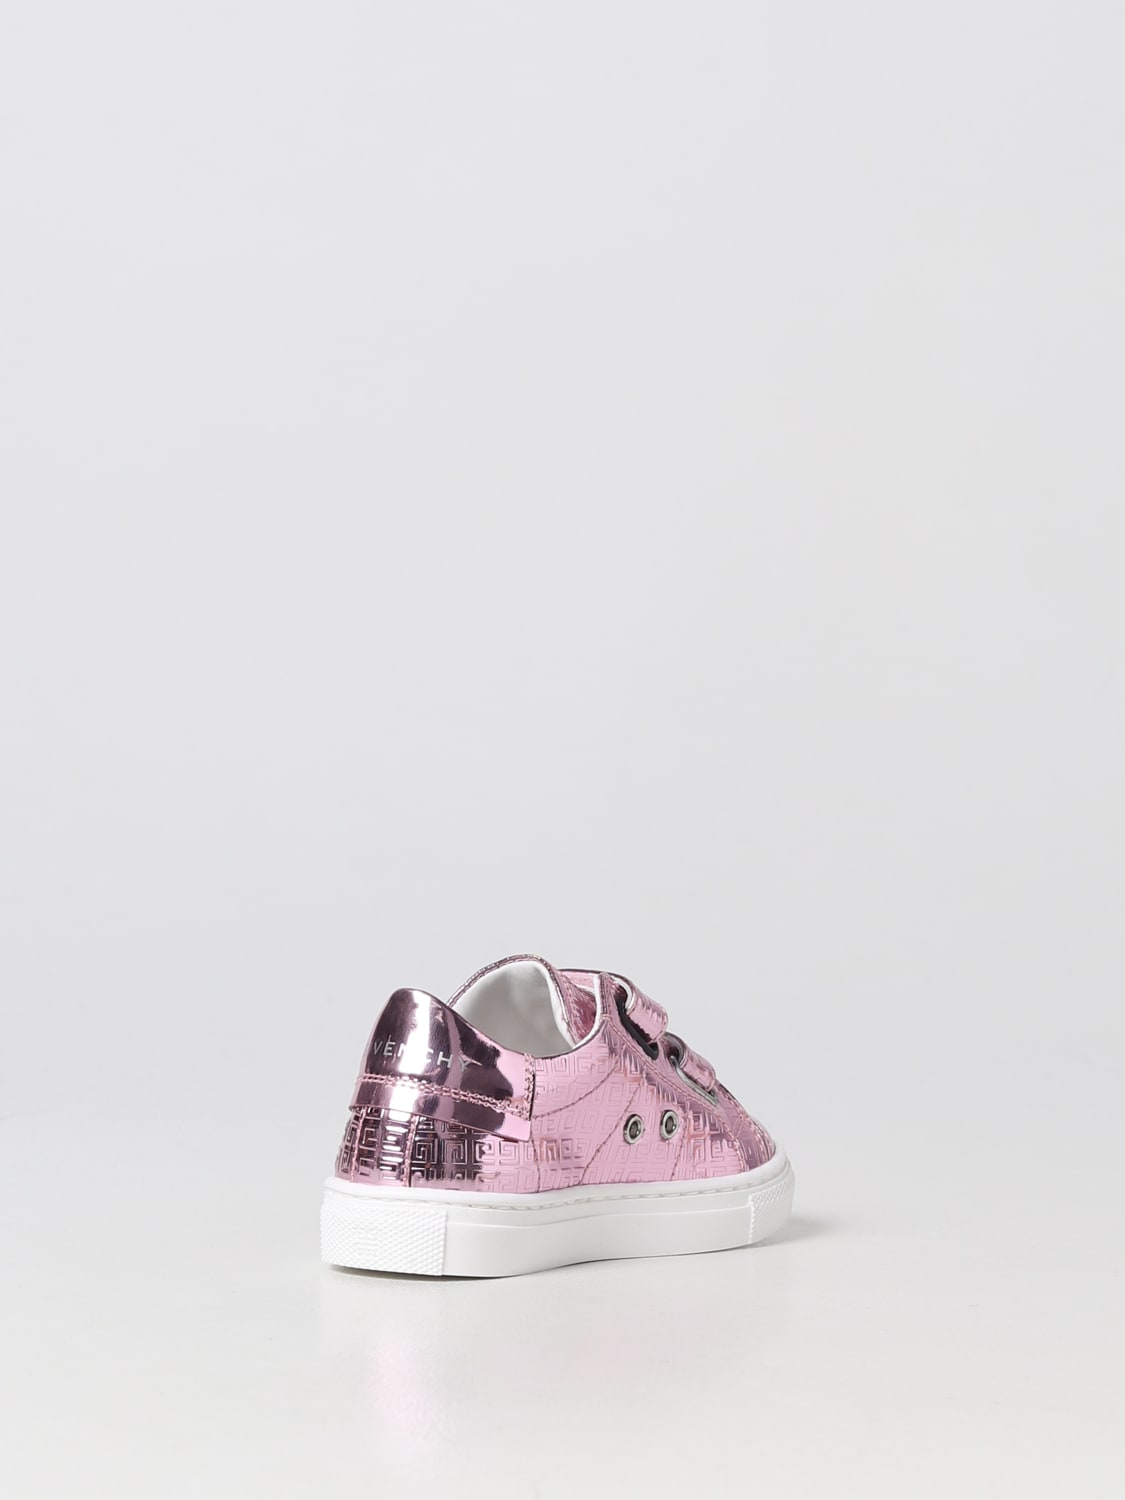 Givenchy Girls Metallic Pink Monogram Print Velcro Sneakers, Brand Size 33 (1.5 Little Kids) in Pink Washed Pink